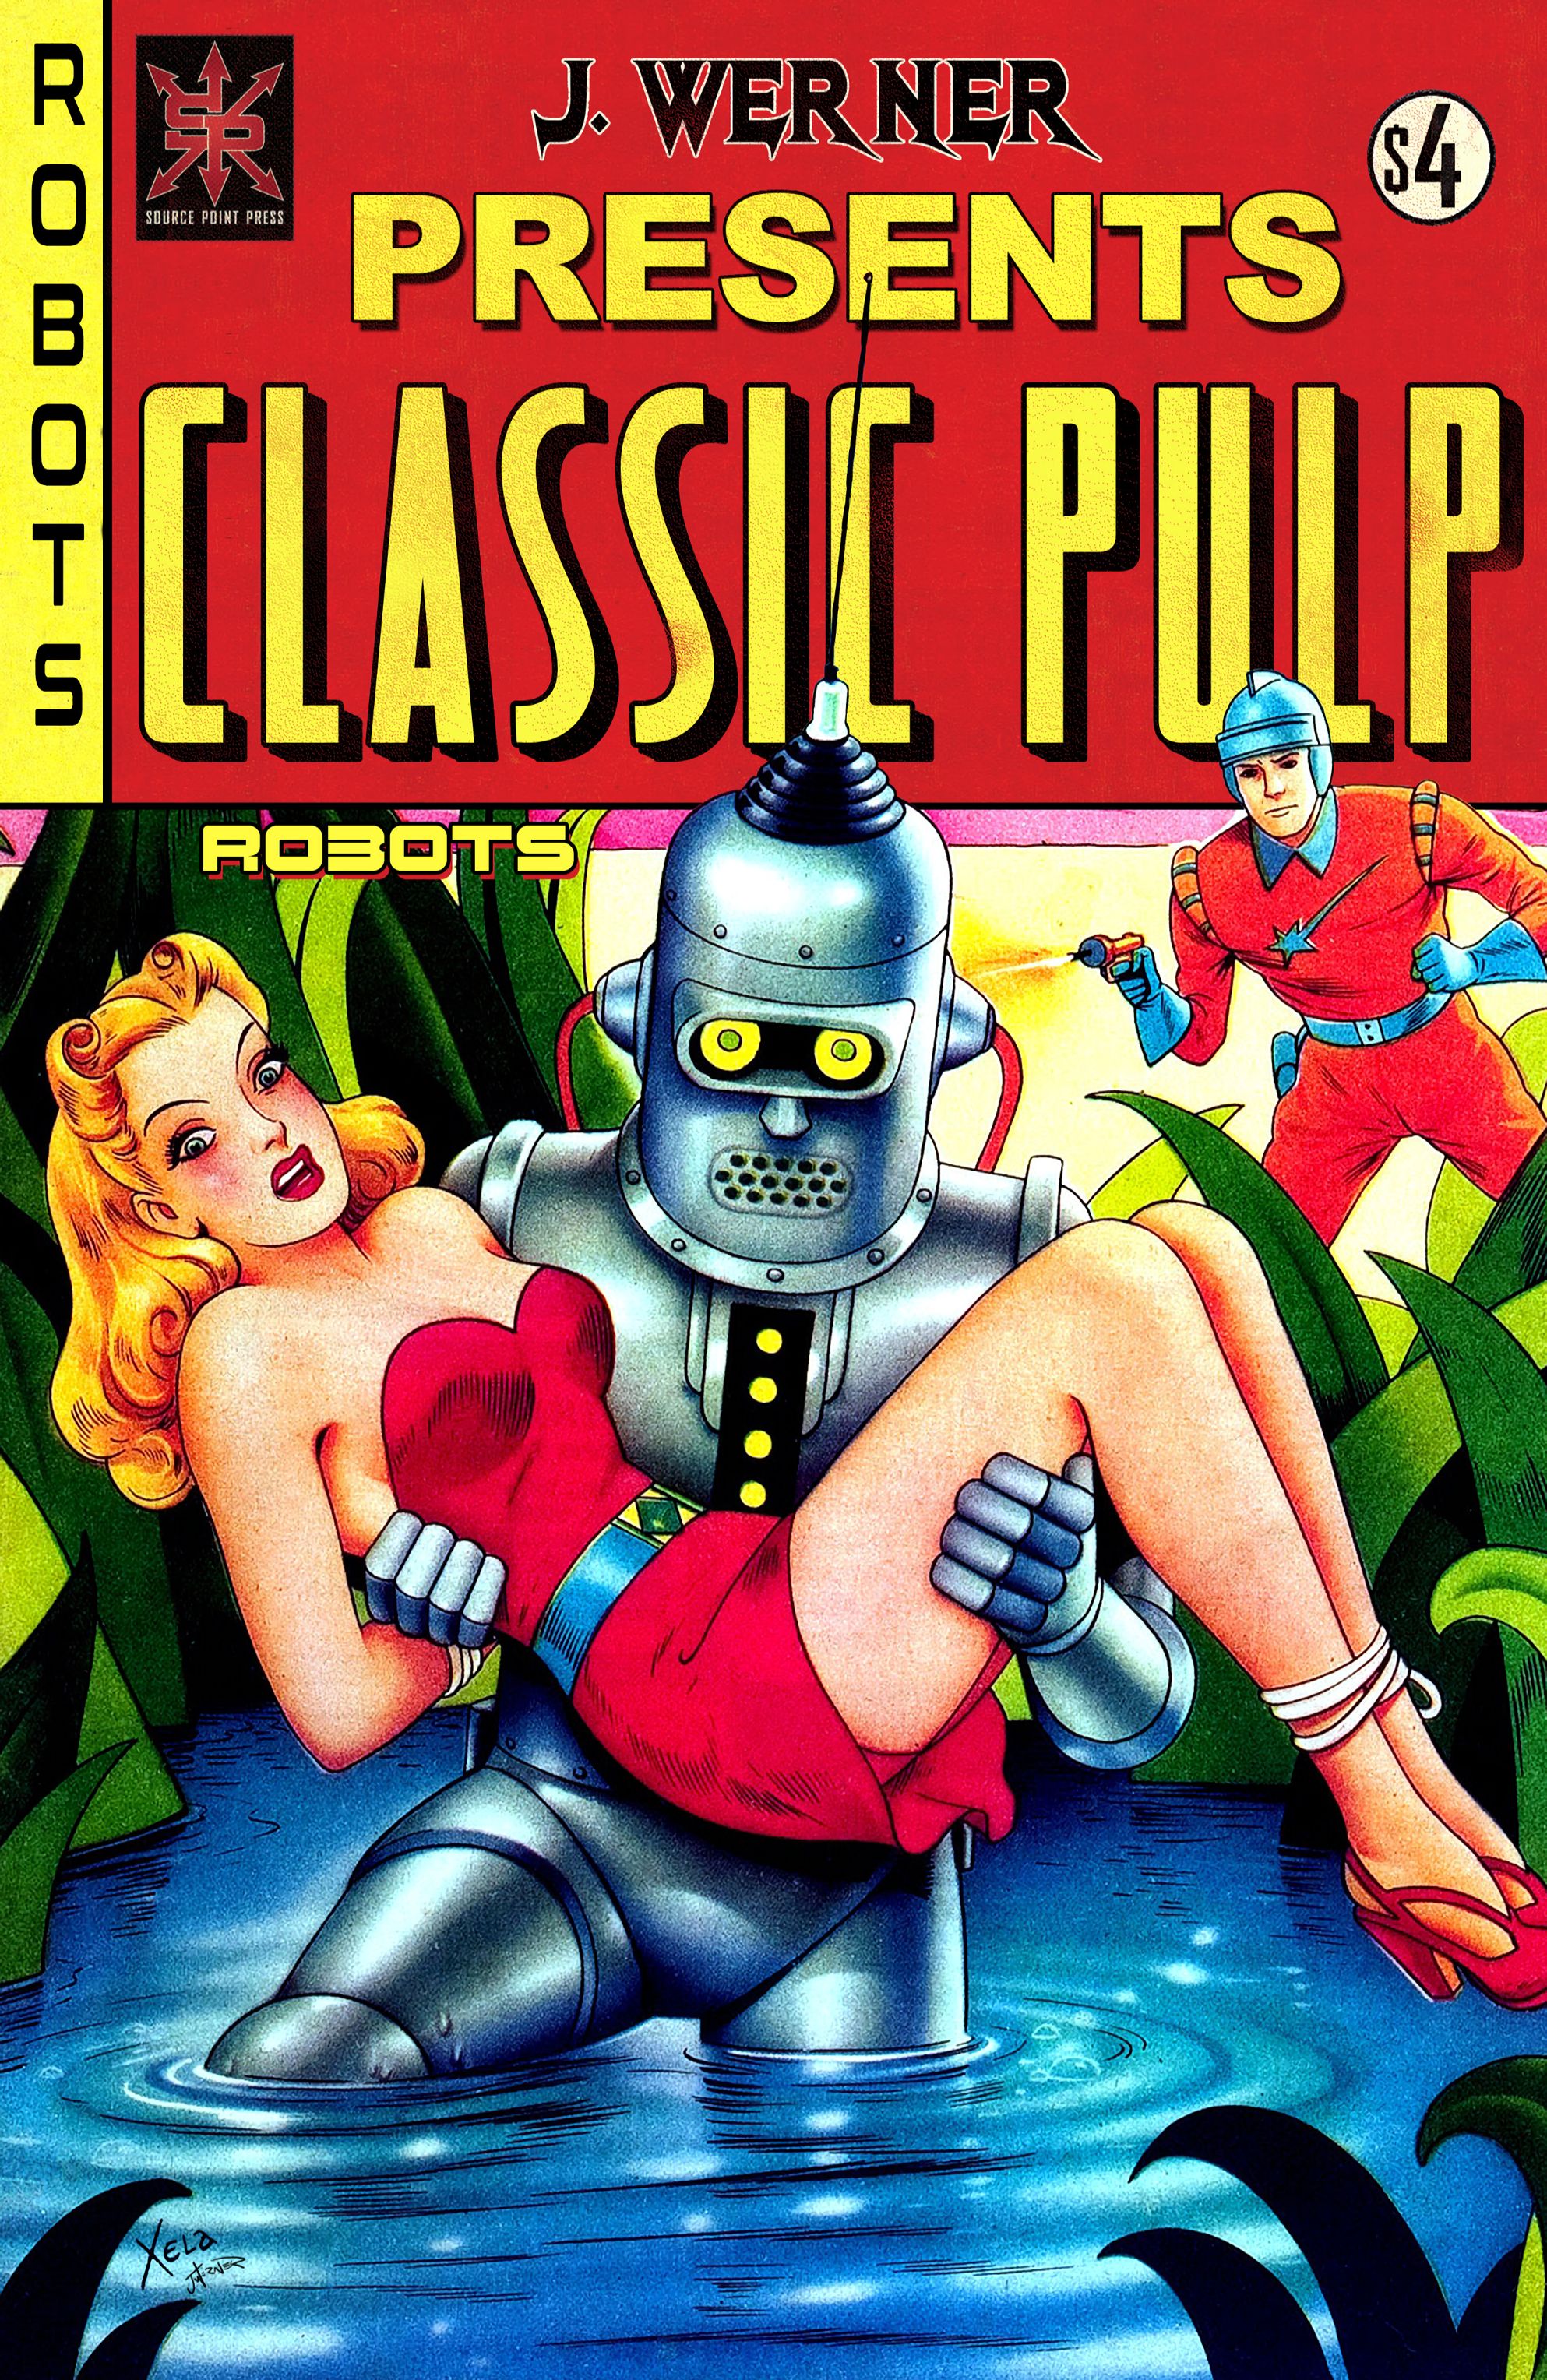 Read online J. Werner presents Classic Pulp comic -  Issue # Robots - 1